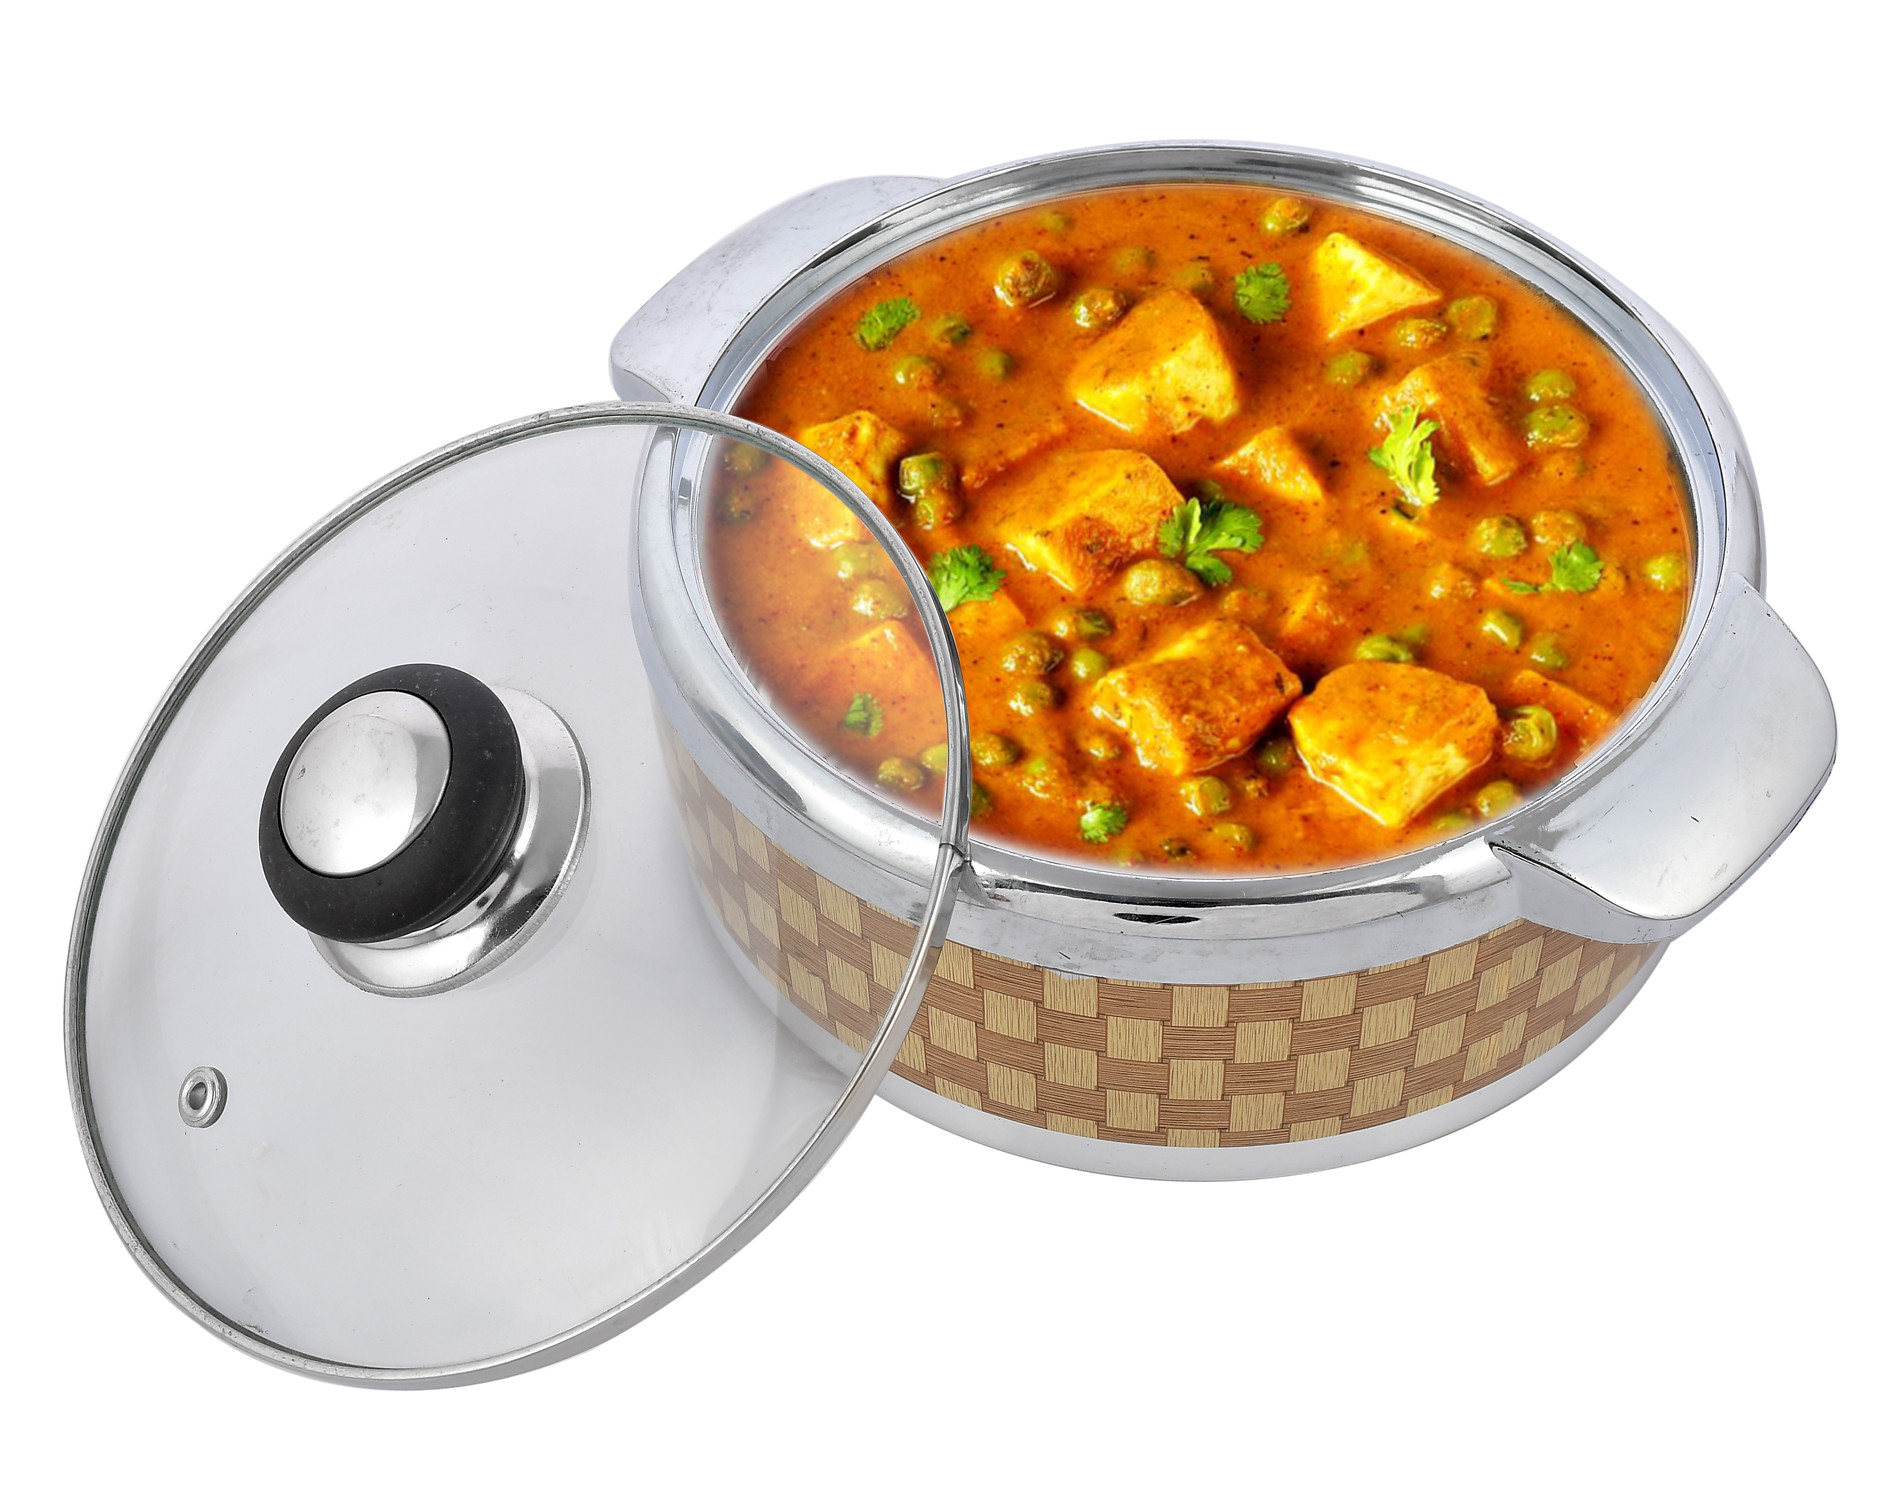 Kuber Industries Check Printed Inner Steel Casserole With Toughened Glass Lid, 1500ml (Brown)-HS42KUBMART25021